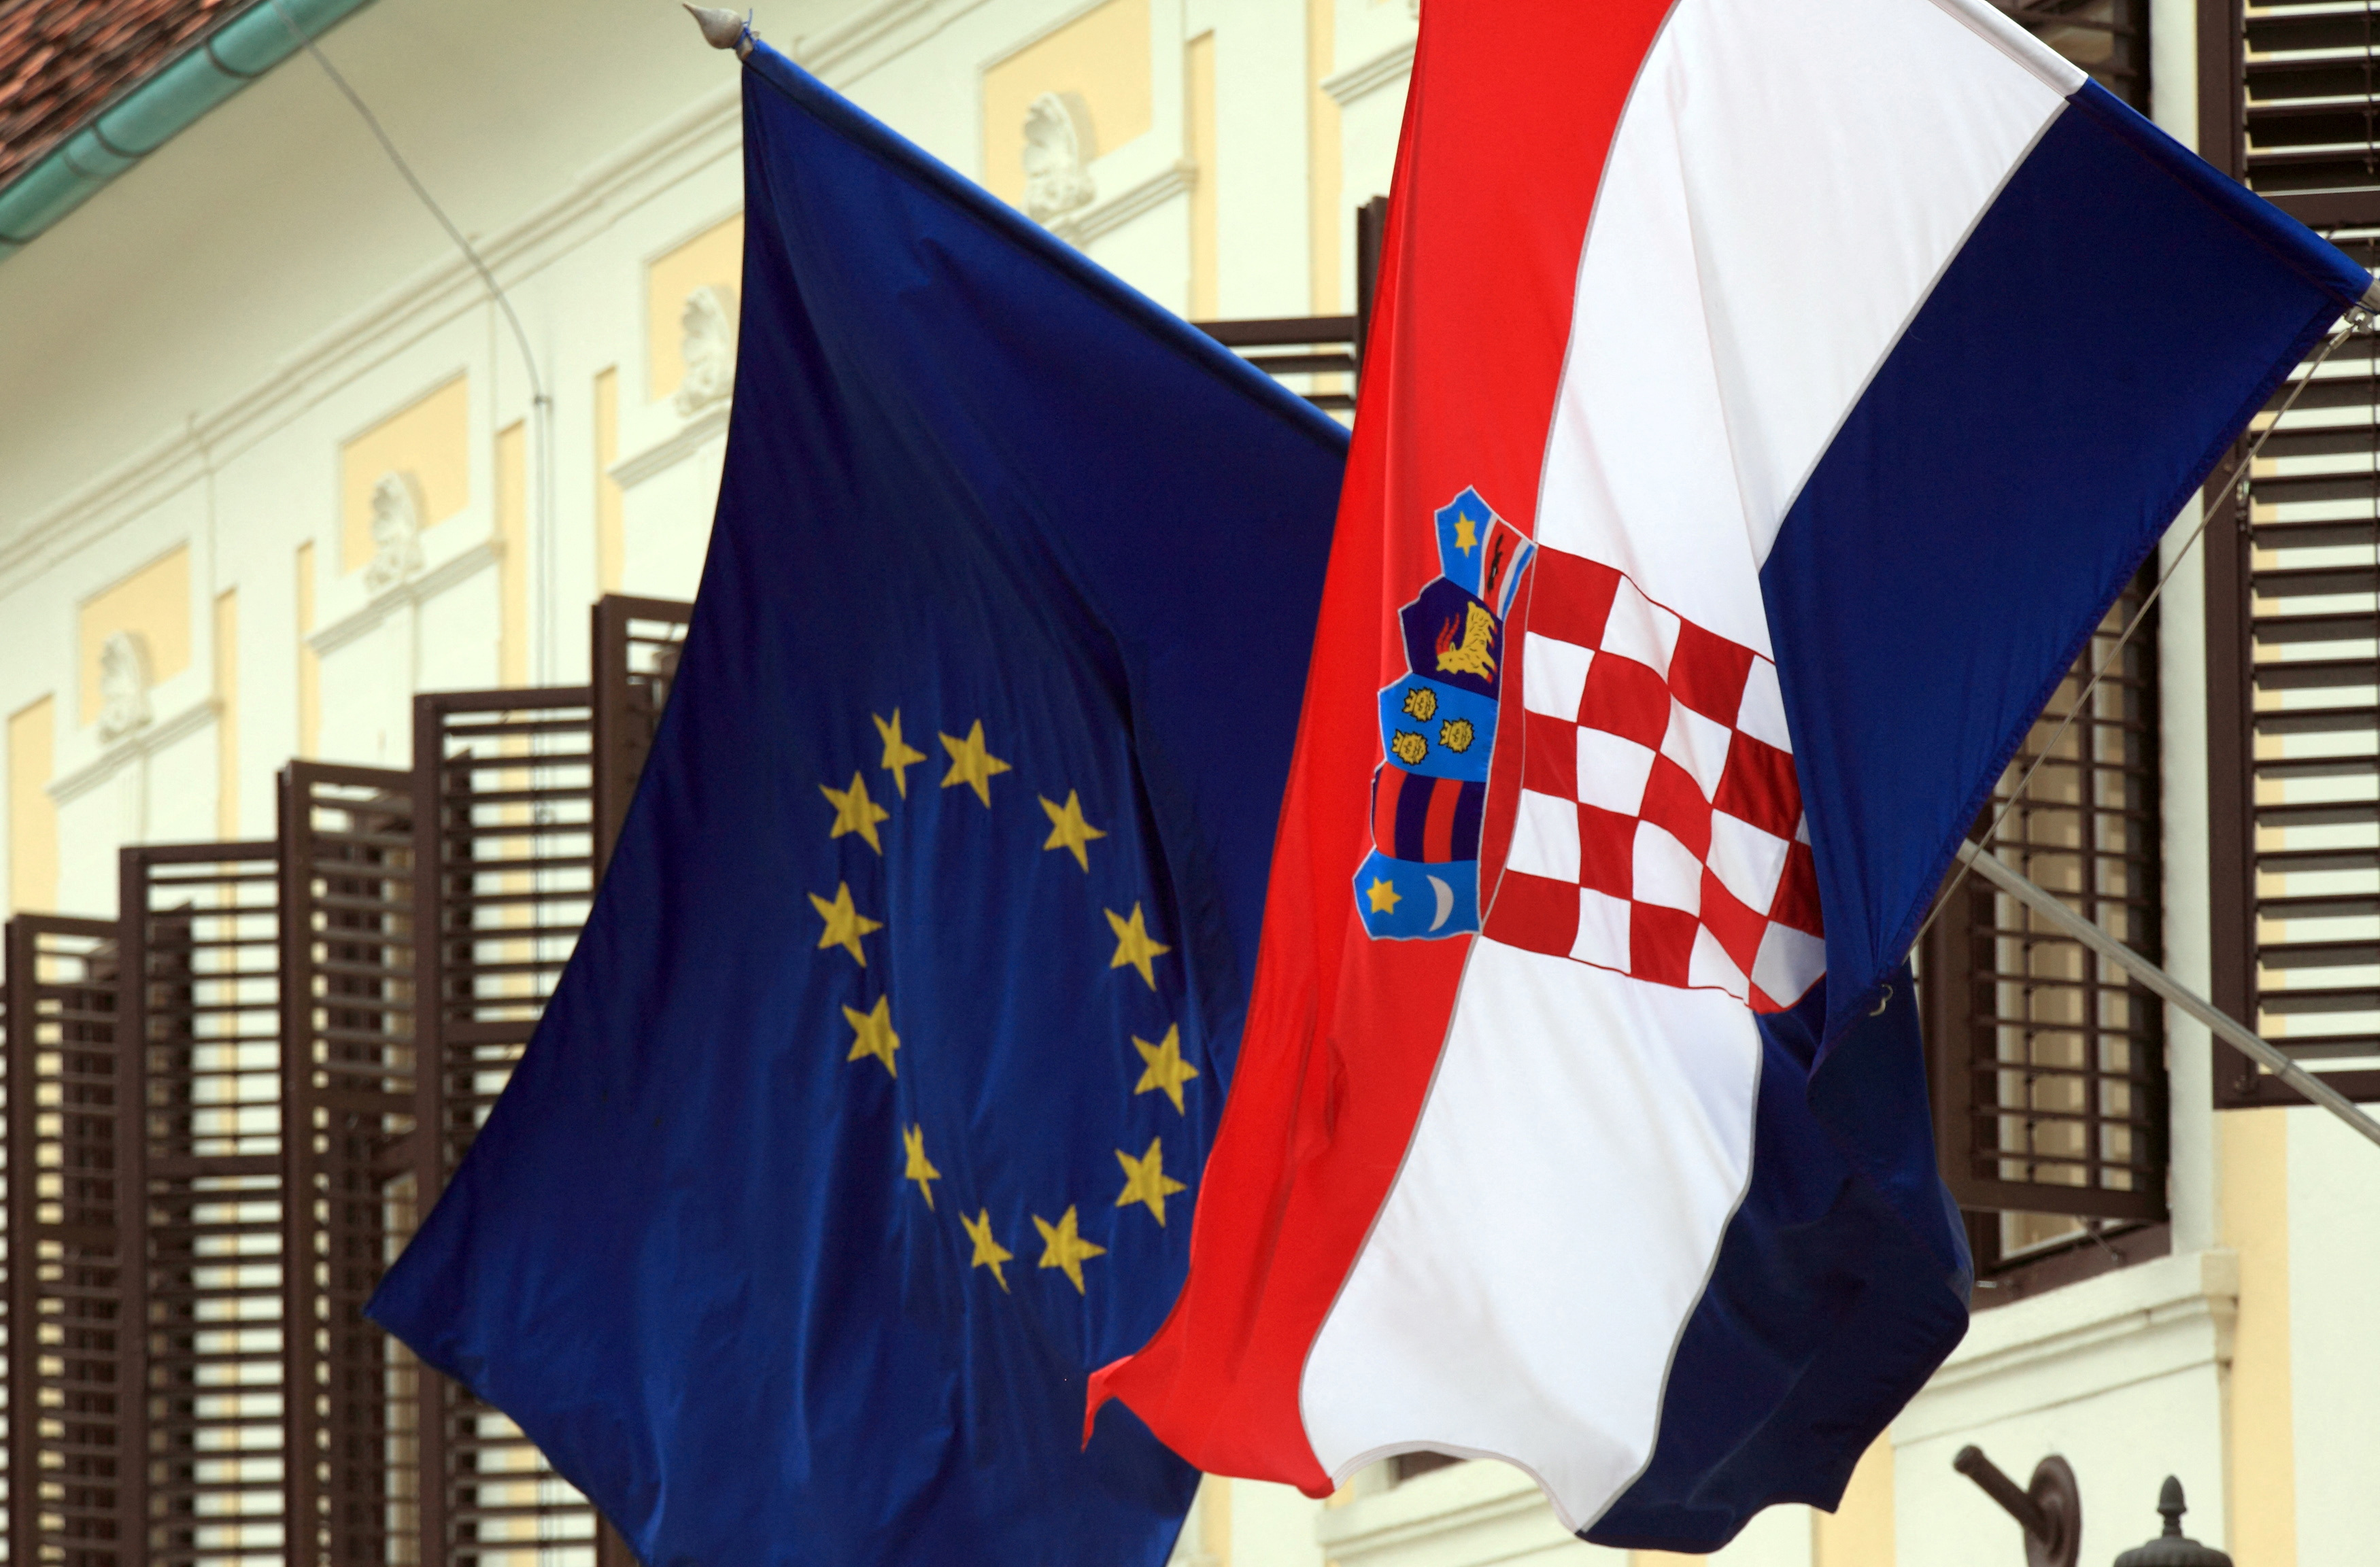 Flags of Croatia and the European Union are seen on the government's building in Zagreb